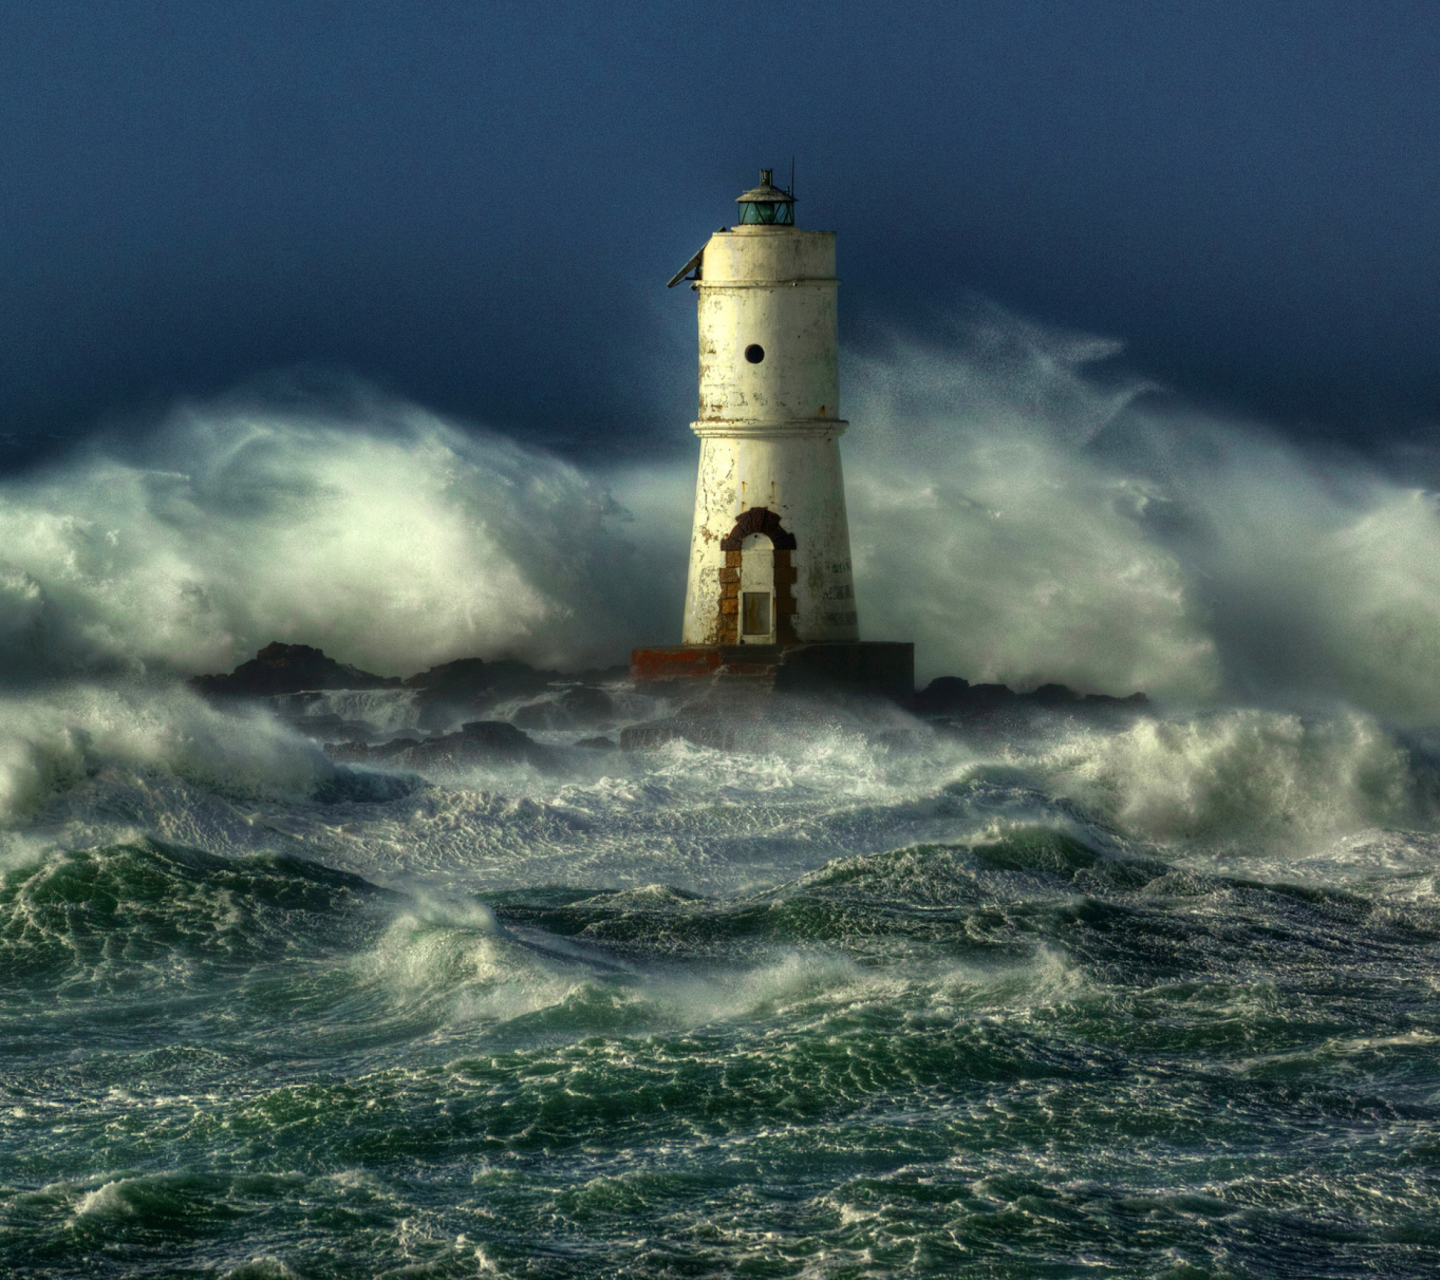 Ocean Storm And Lonely Lighthouse screenshot #1 1440x1280